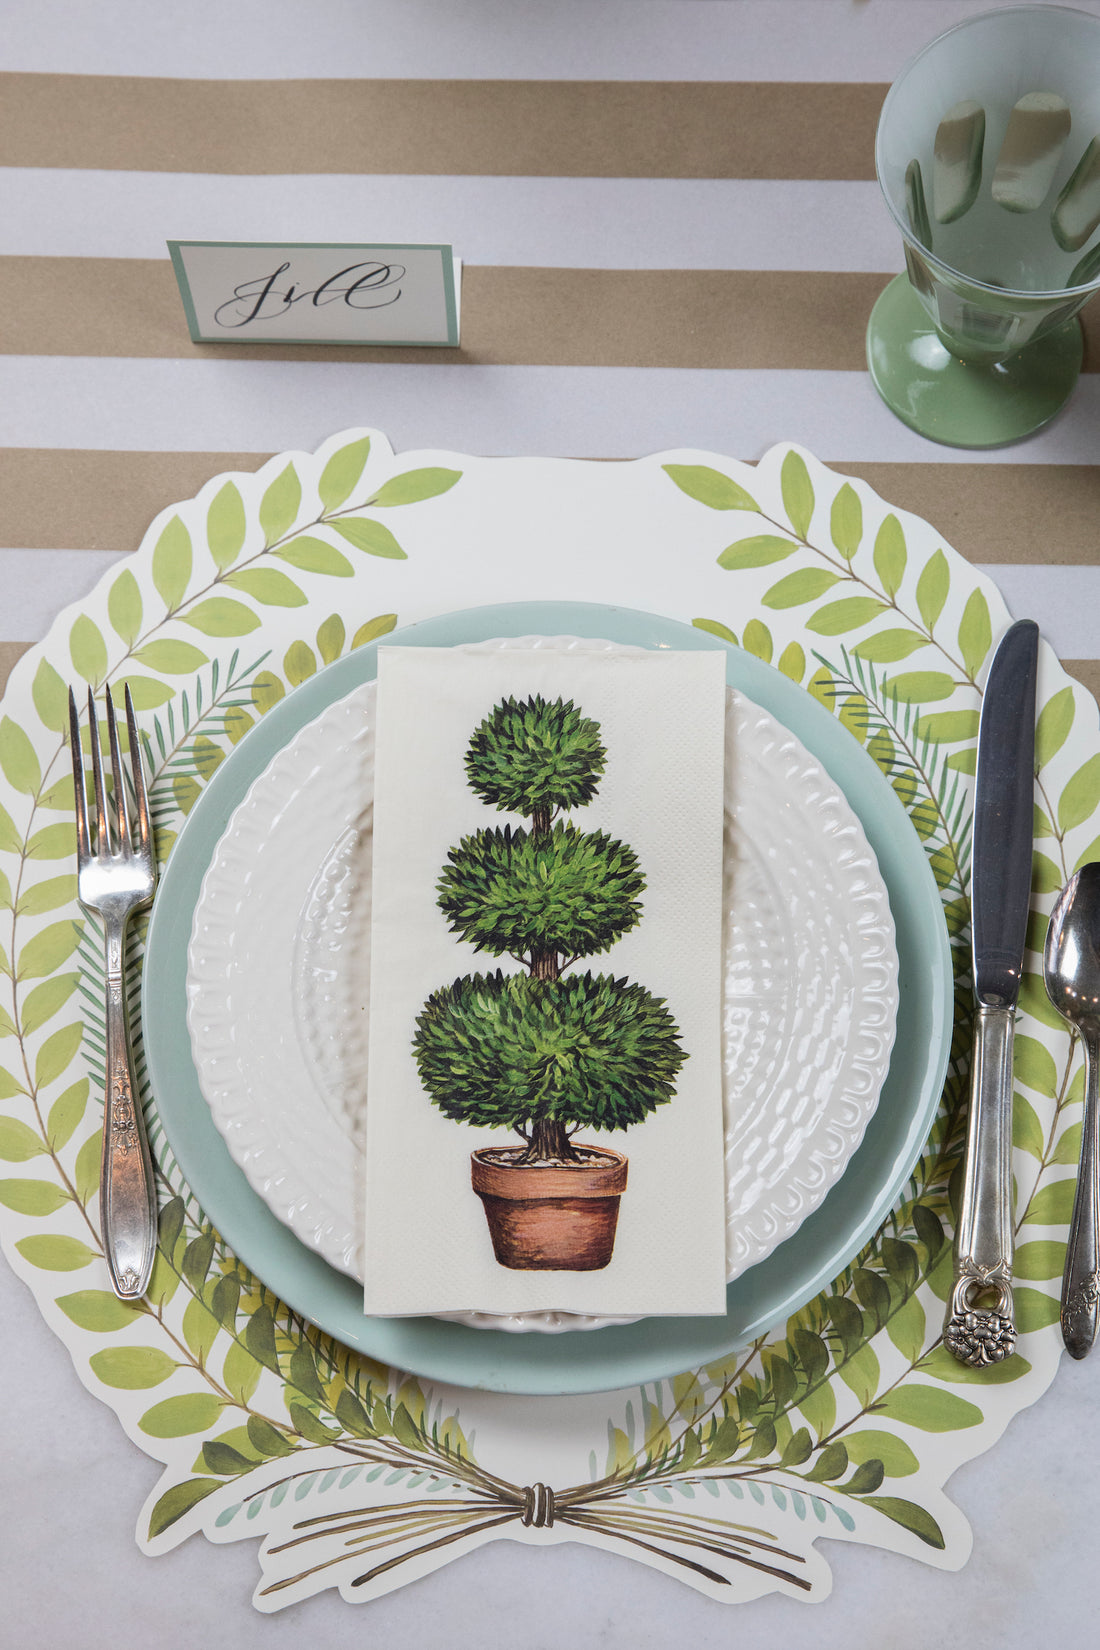 The Die-cut Seedling Wreath Placemat under an elegant place setting, from above.